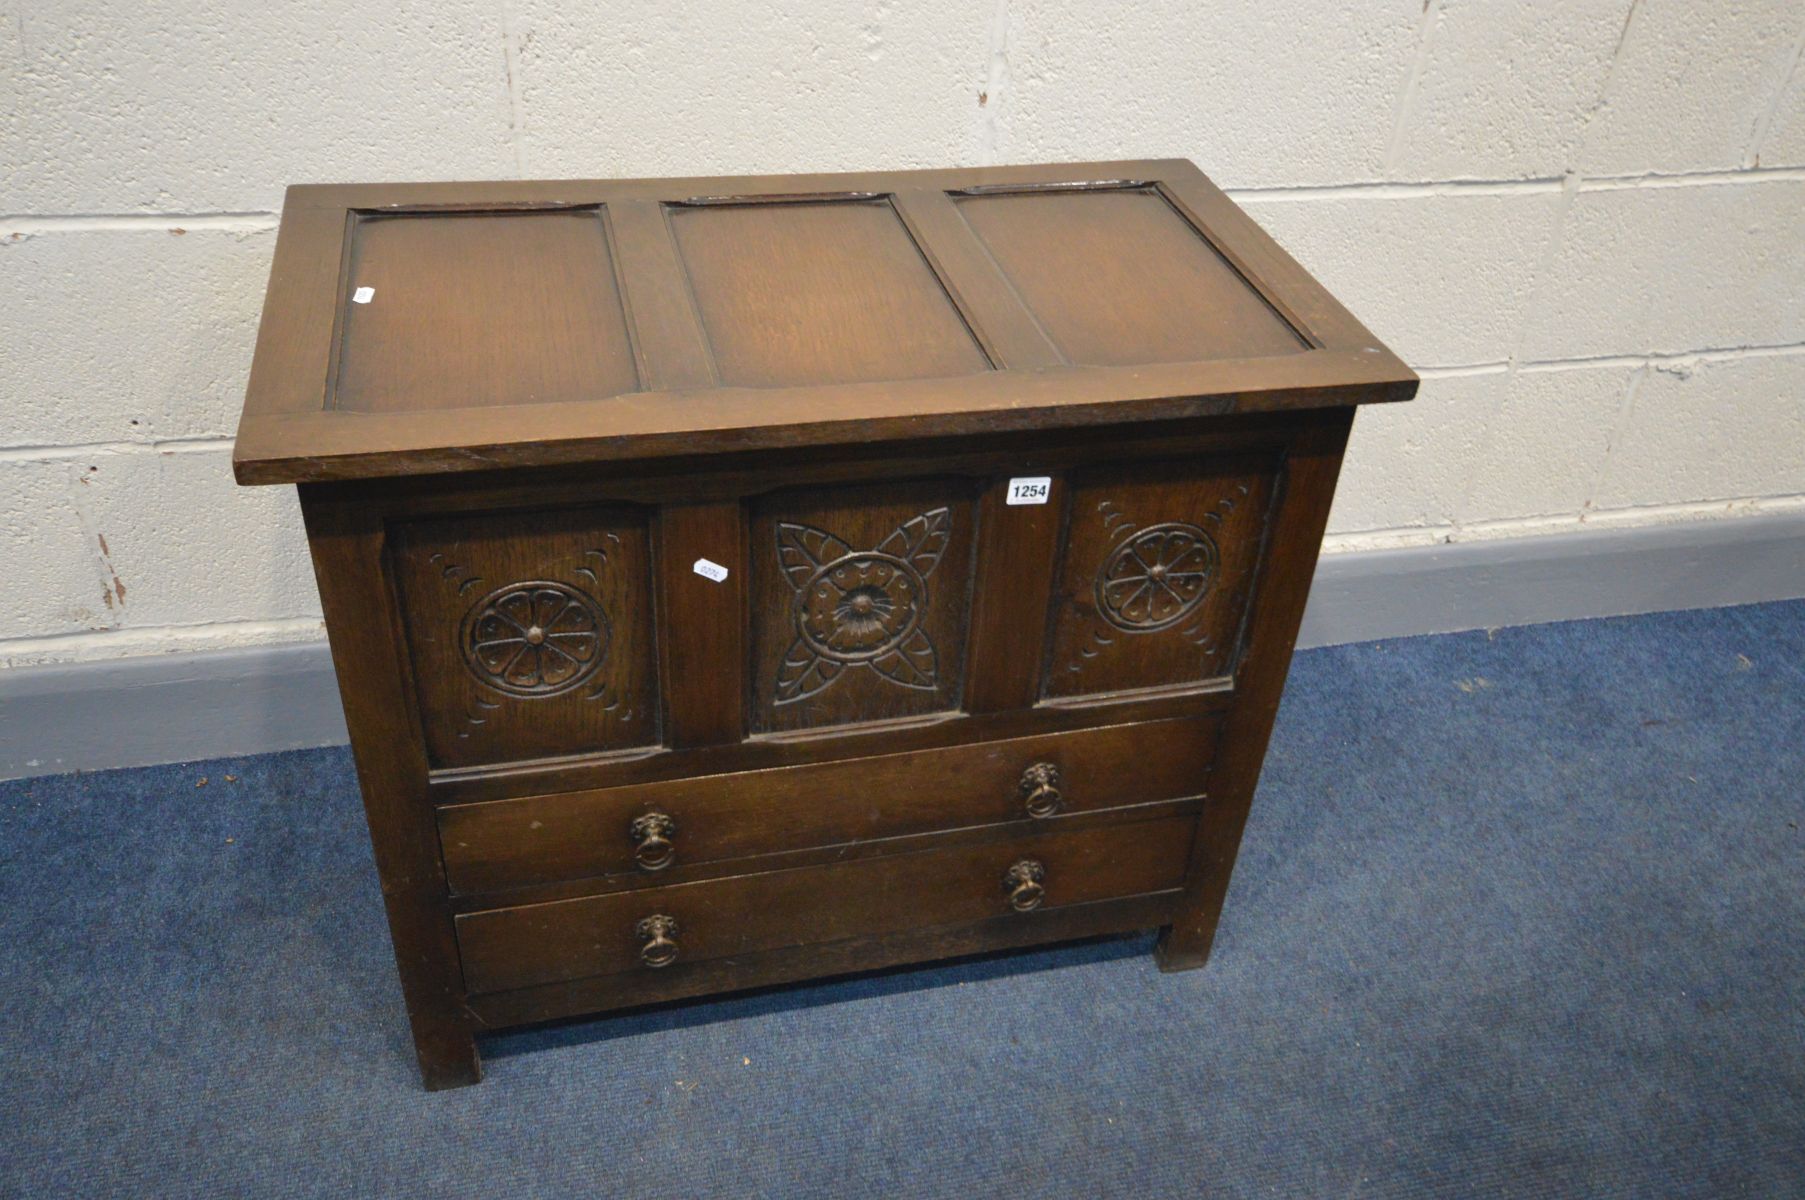 AN OAK PANELLED BLANKET CHEST, with two drawers, width 82cm x depth 45cm x height 69cm